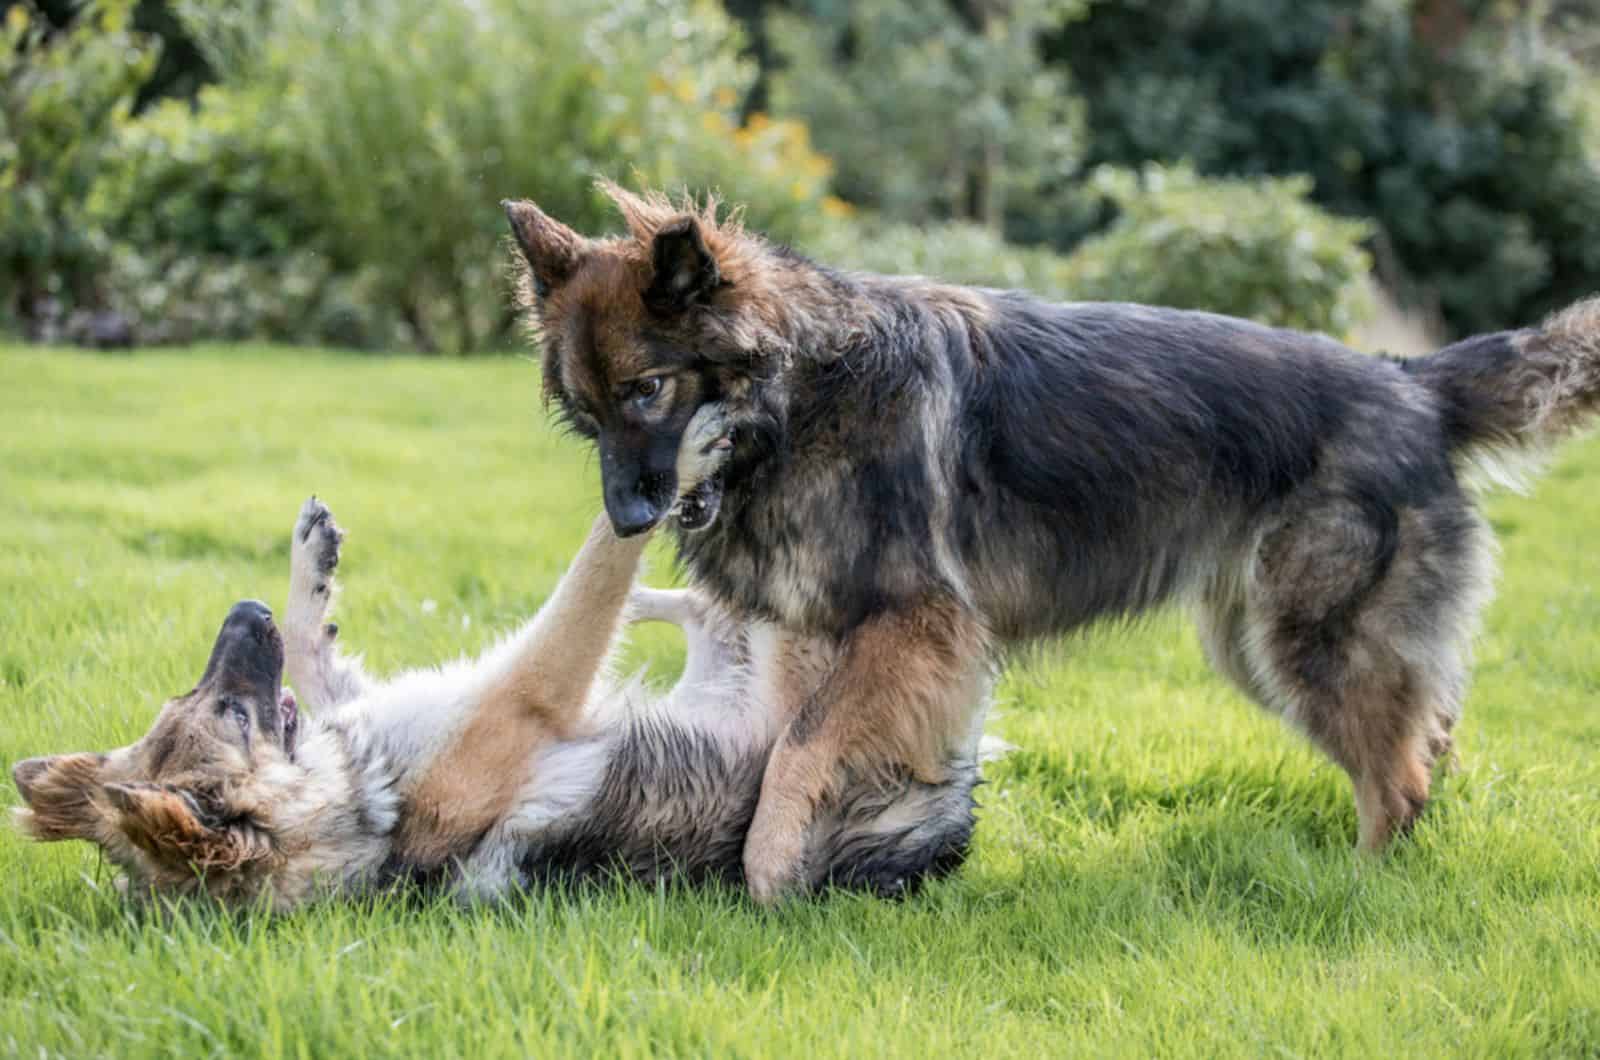 german shepherd dogs playing fighting together in the park